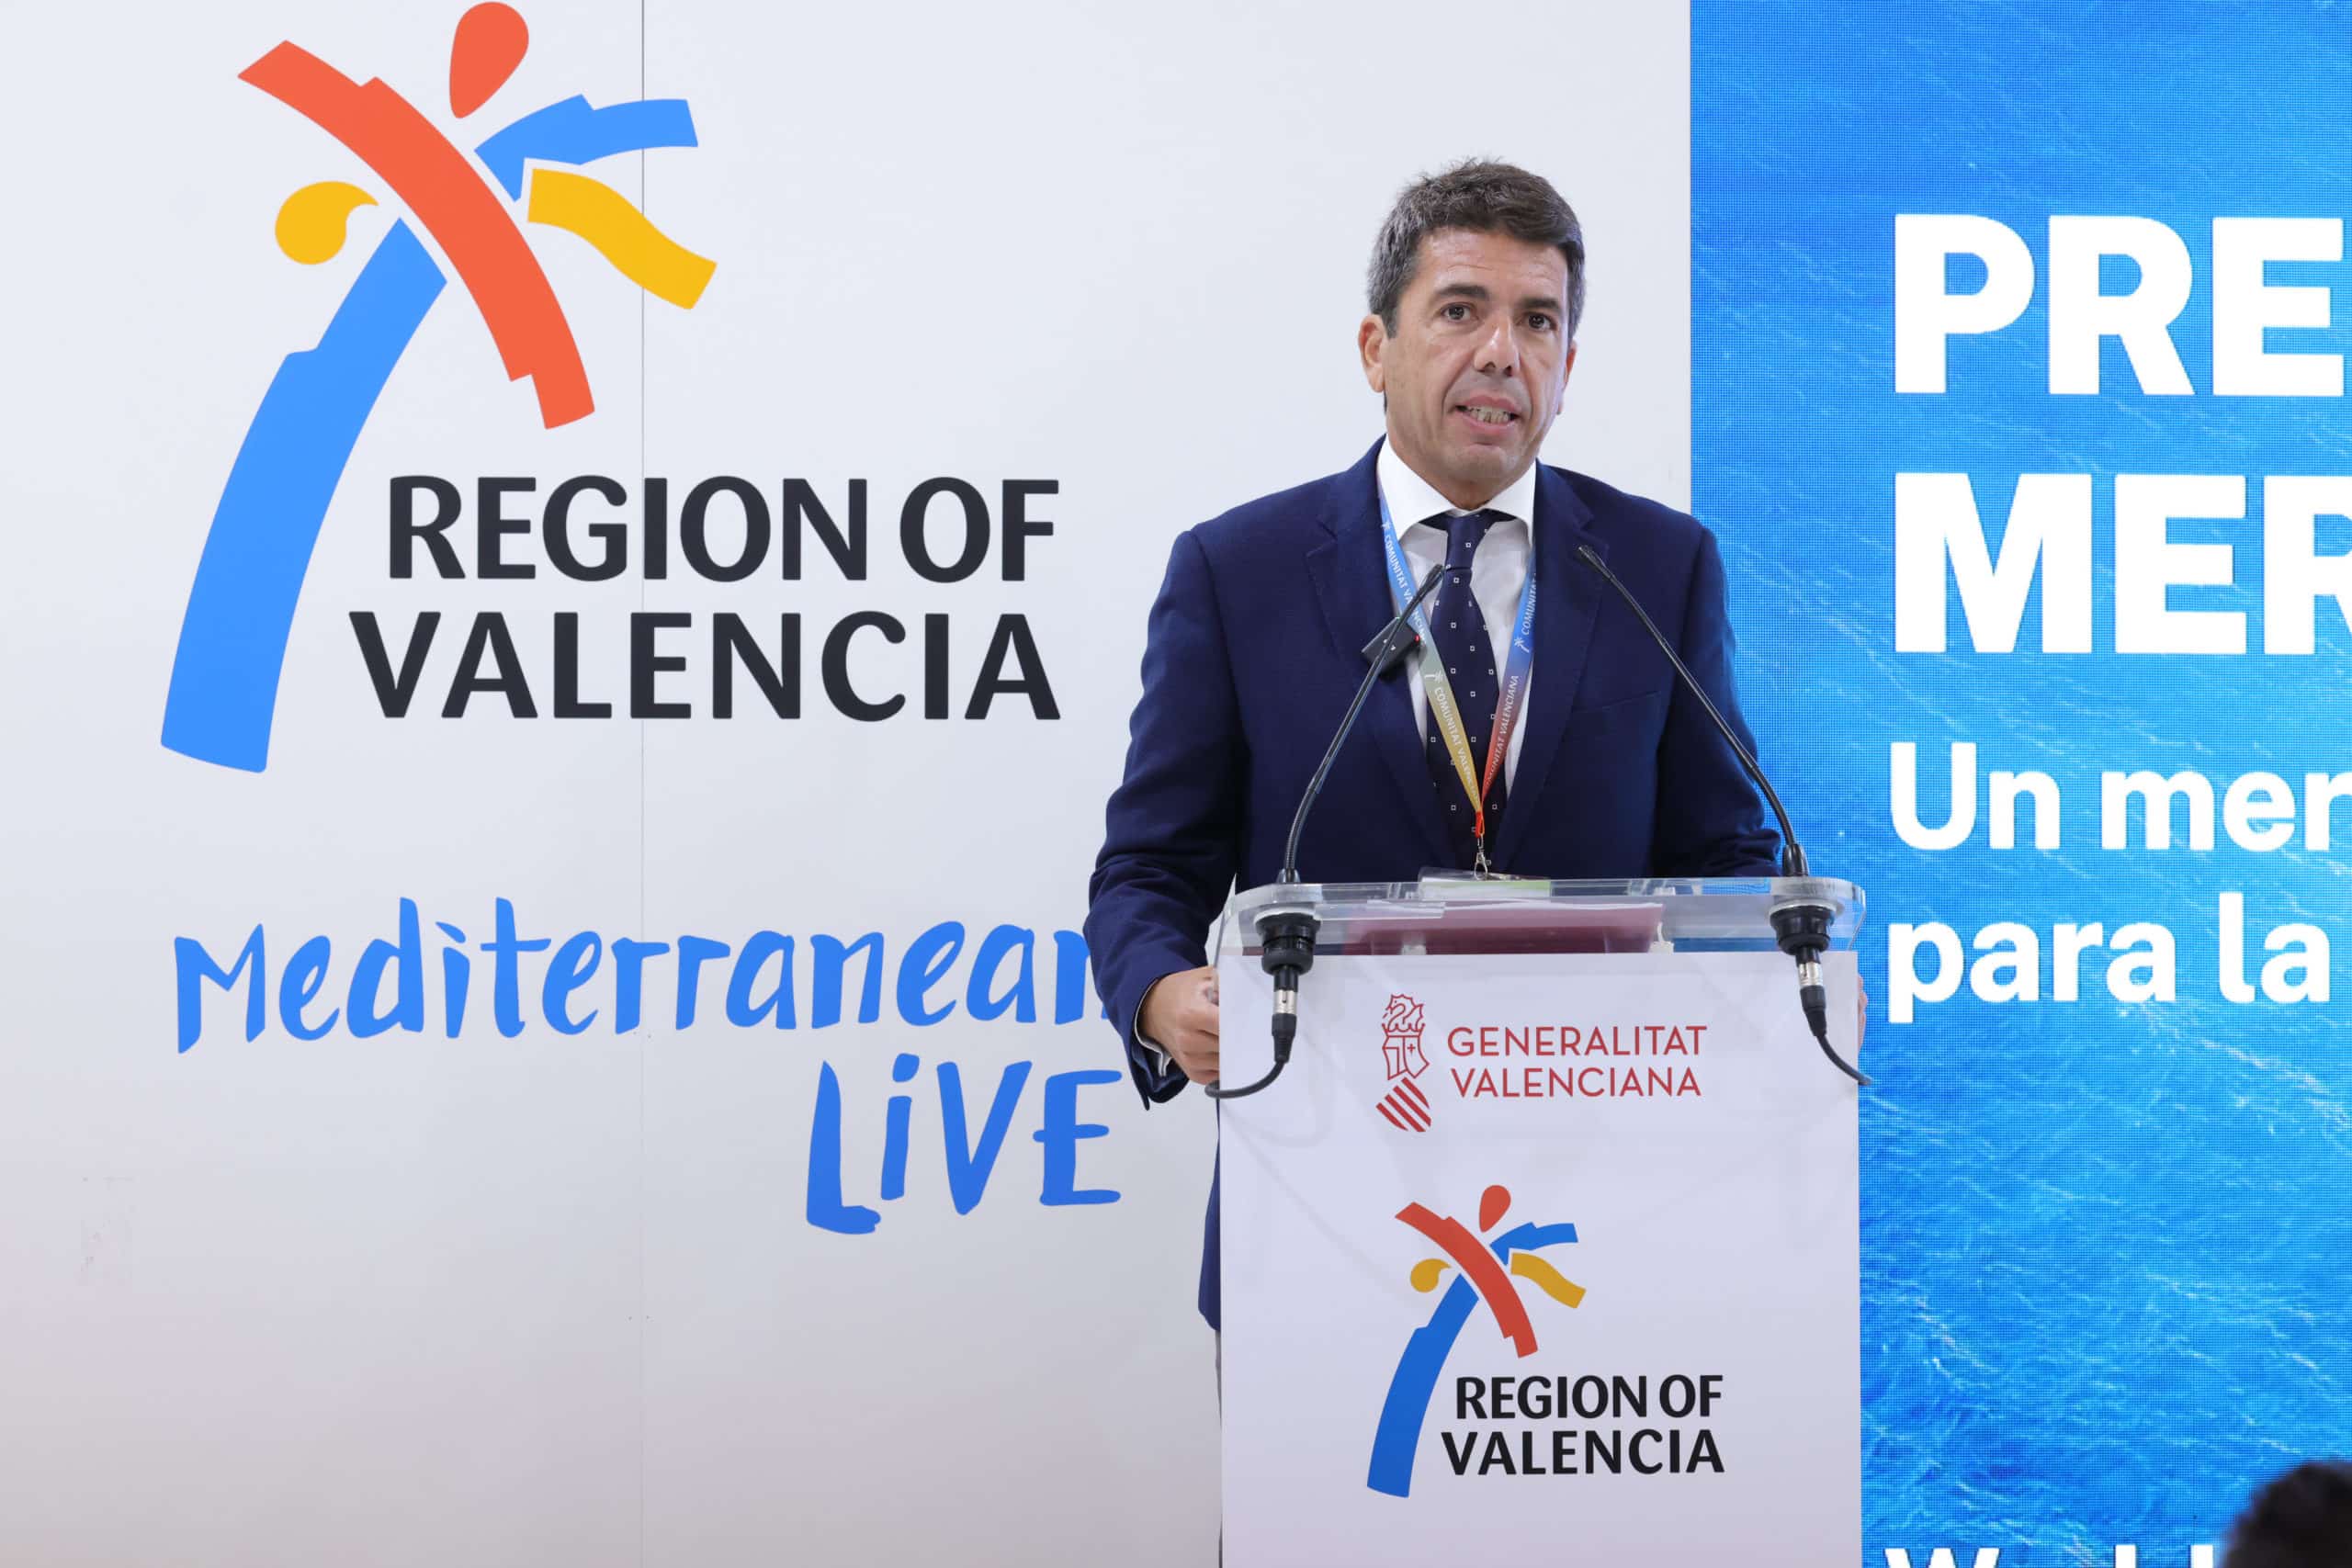 Carlos Mazón will show the “Mediterranean Attitude” at Fitur to open new business opportunities and attract more tourists